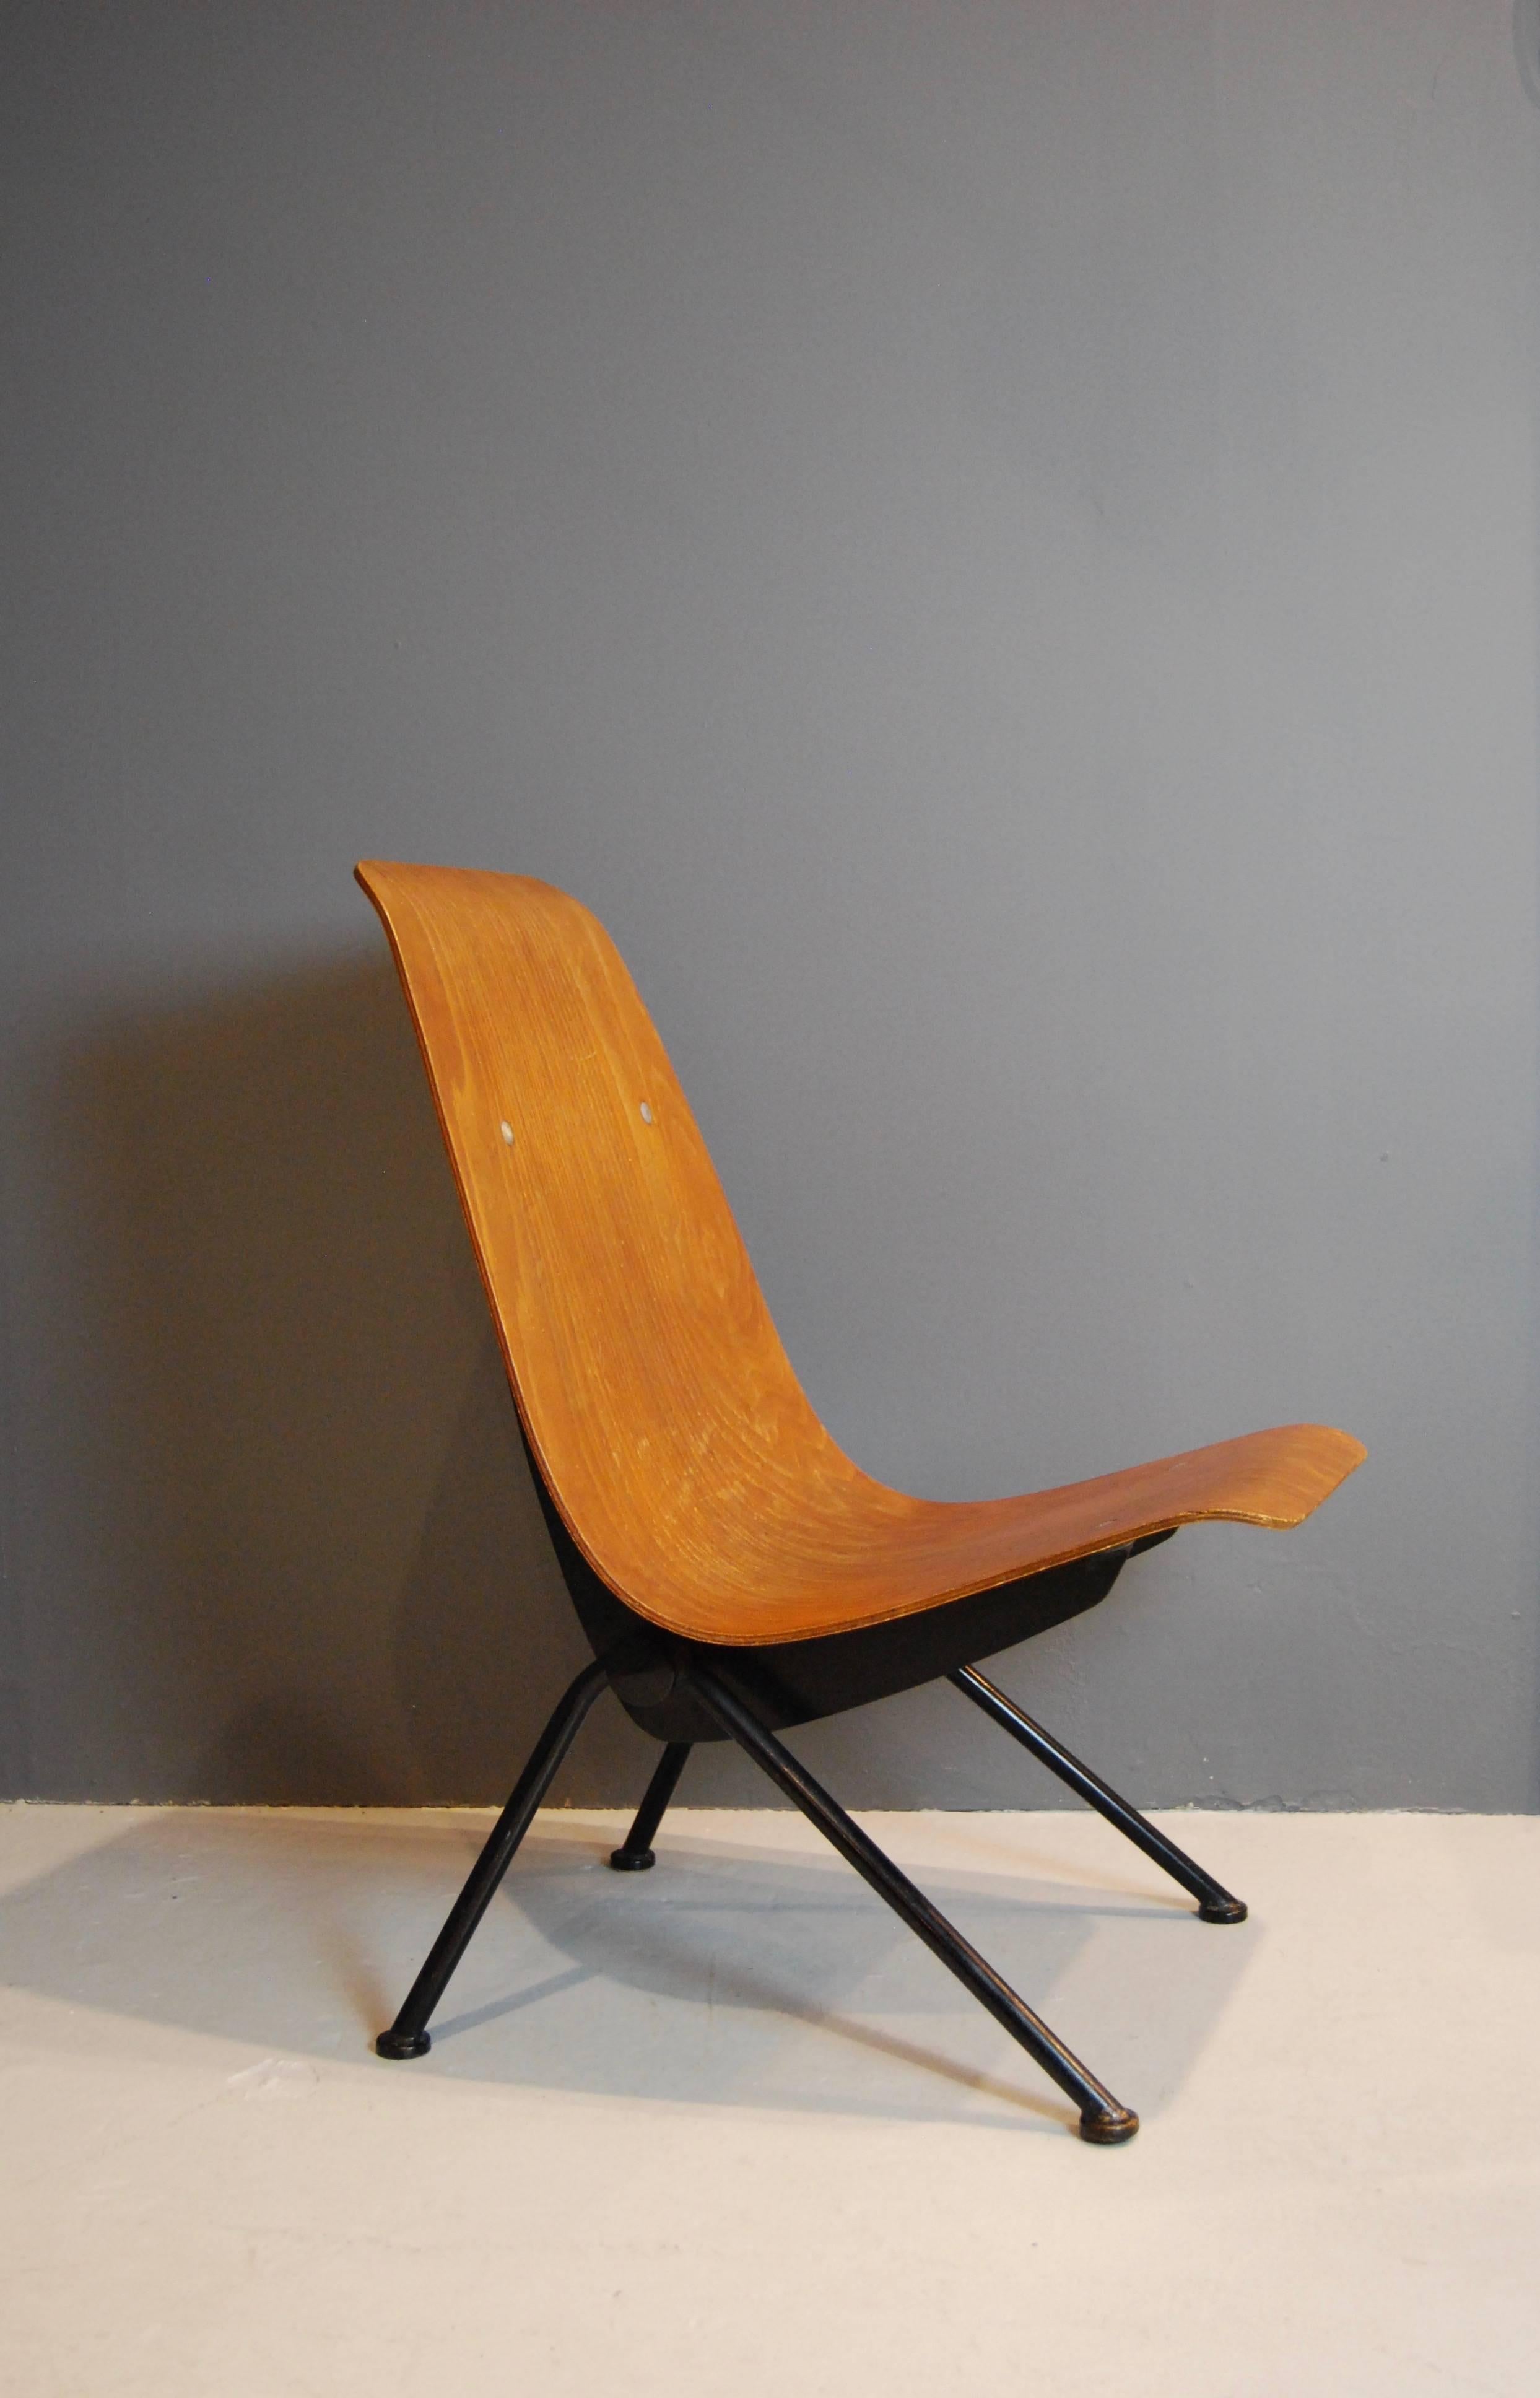 Antony chair, designed in 1954 by Jean Prouve and produced by Atelier Prouve.
Molded beech plywood, enameled steel, aluminium.
This chair is in great original condition, showing signs of wear and beautiful patina.
 